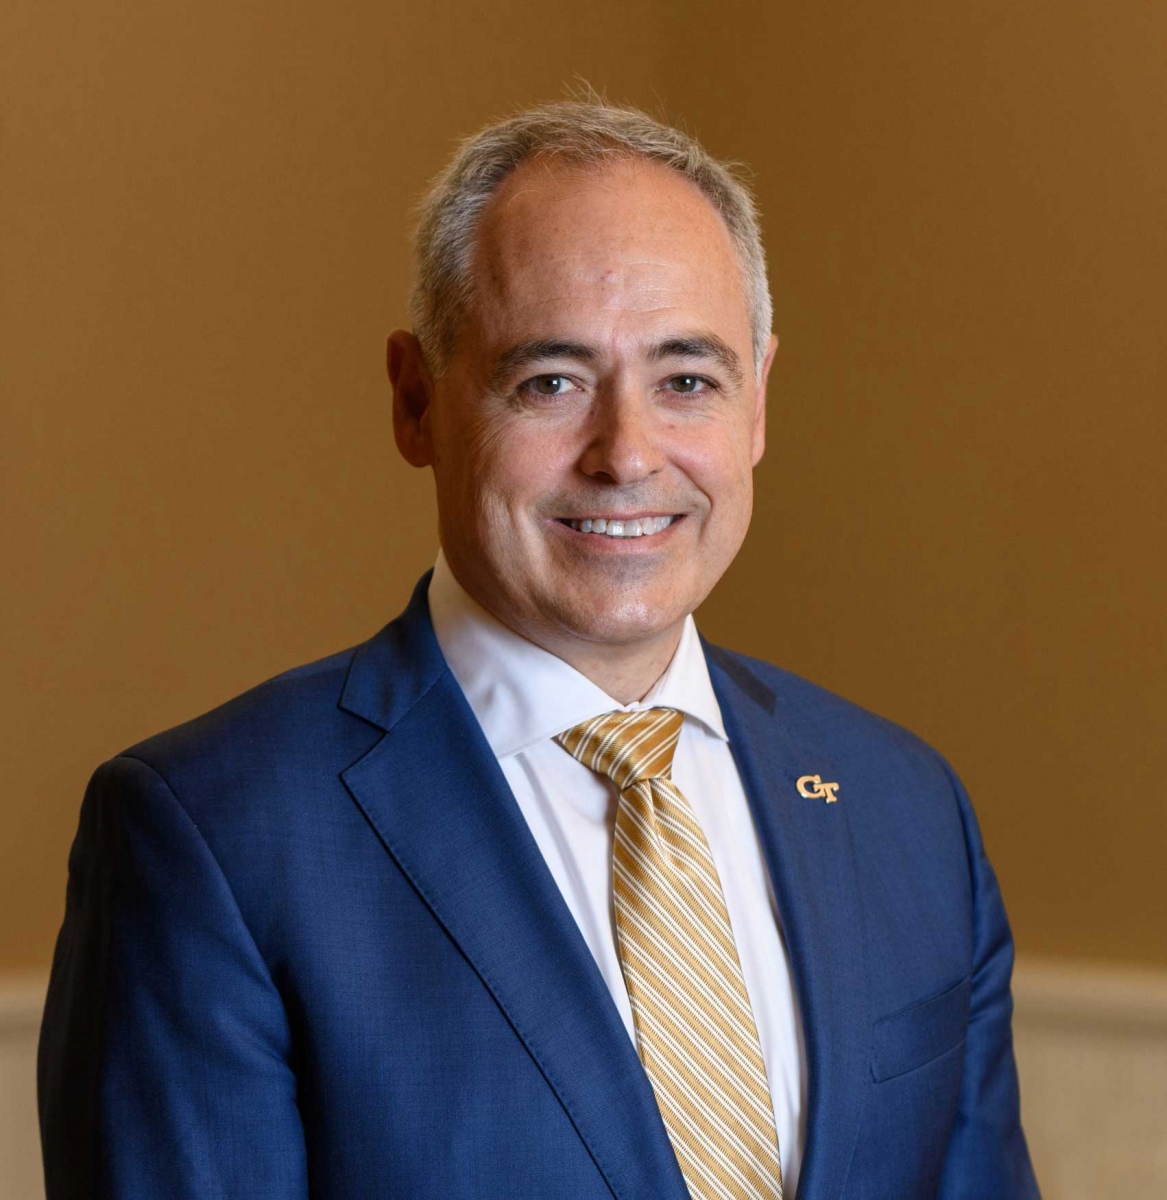 “Our Diversity and Inclusion Council is one of several action steps announced this past summer to deliver on our promise of inclusion,” said Georgia Tech President Ángel Cabrera.